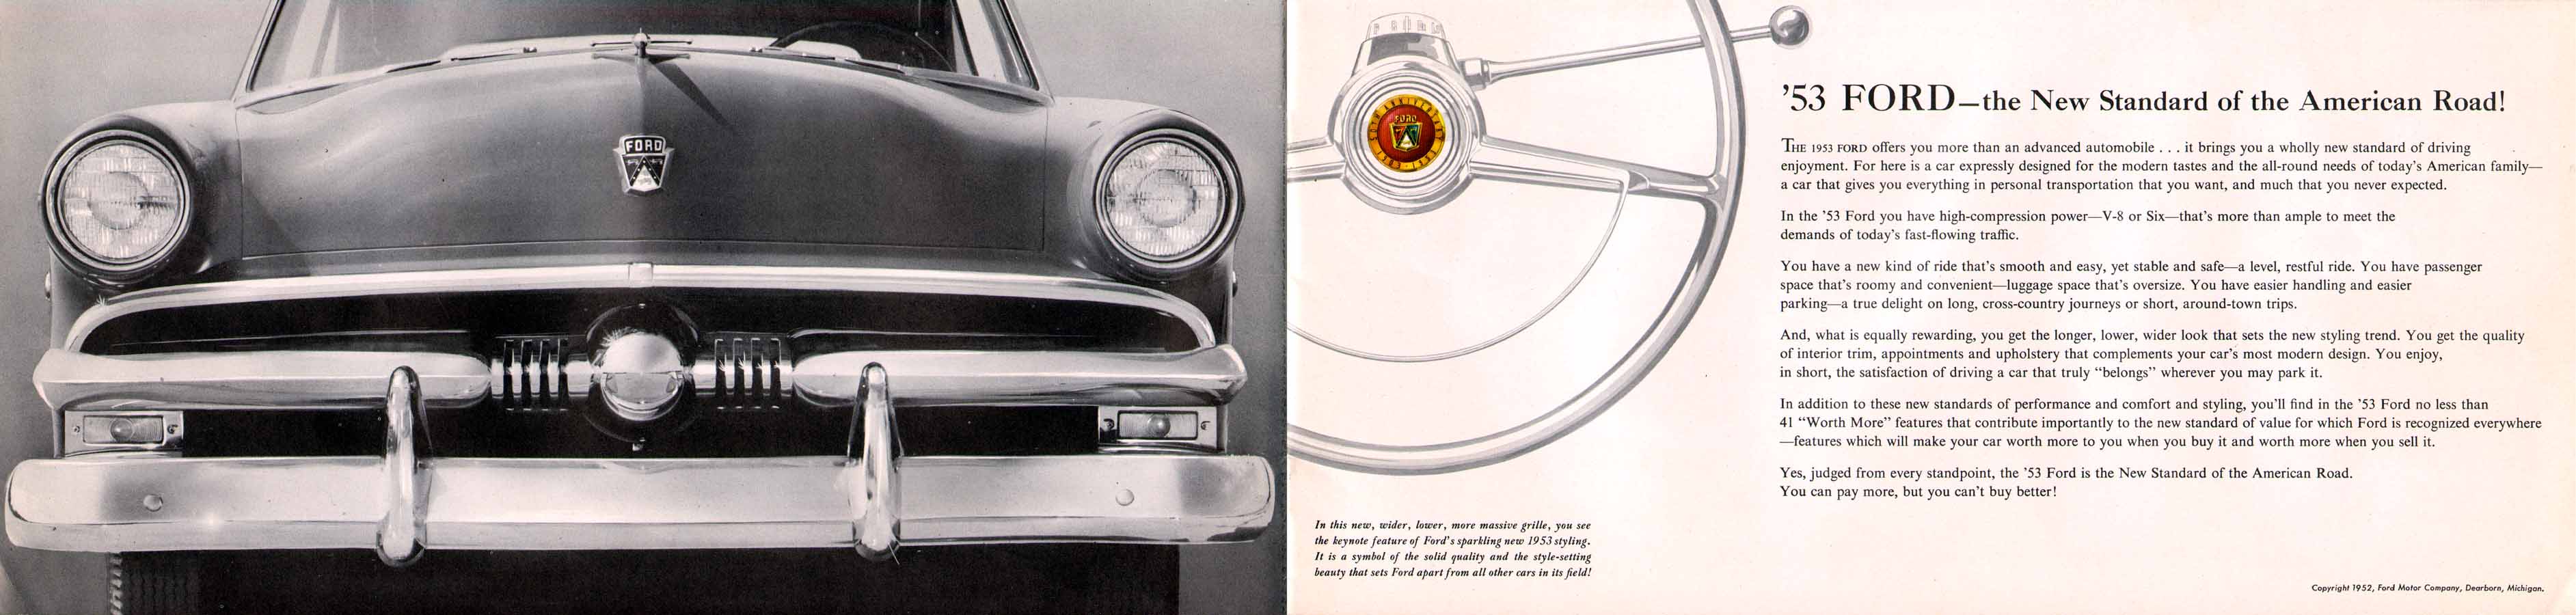 1953 Ford Brochure Page 1